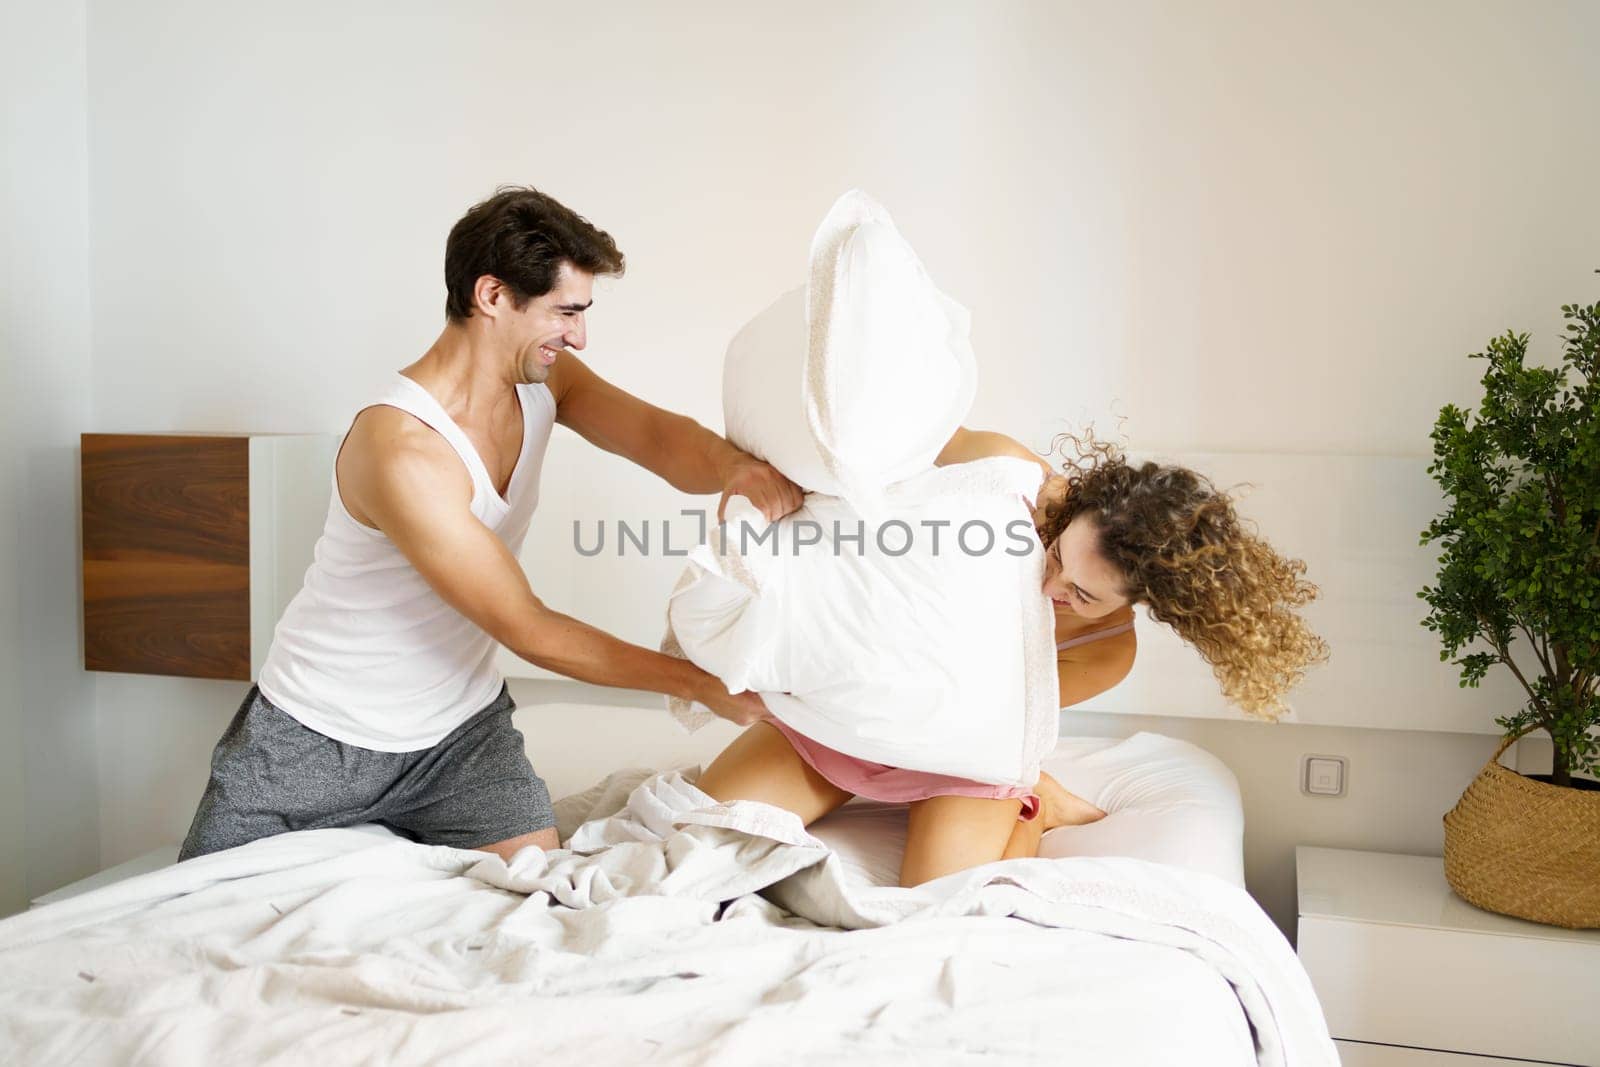 Side view of smiling adult male in nightwear looking away while kneeling on bed with eyes closed curly haired female, in bedroom and having fun with pillows fighting in daylight